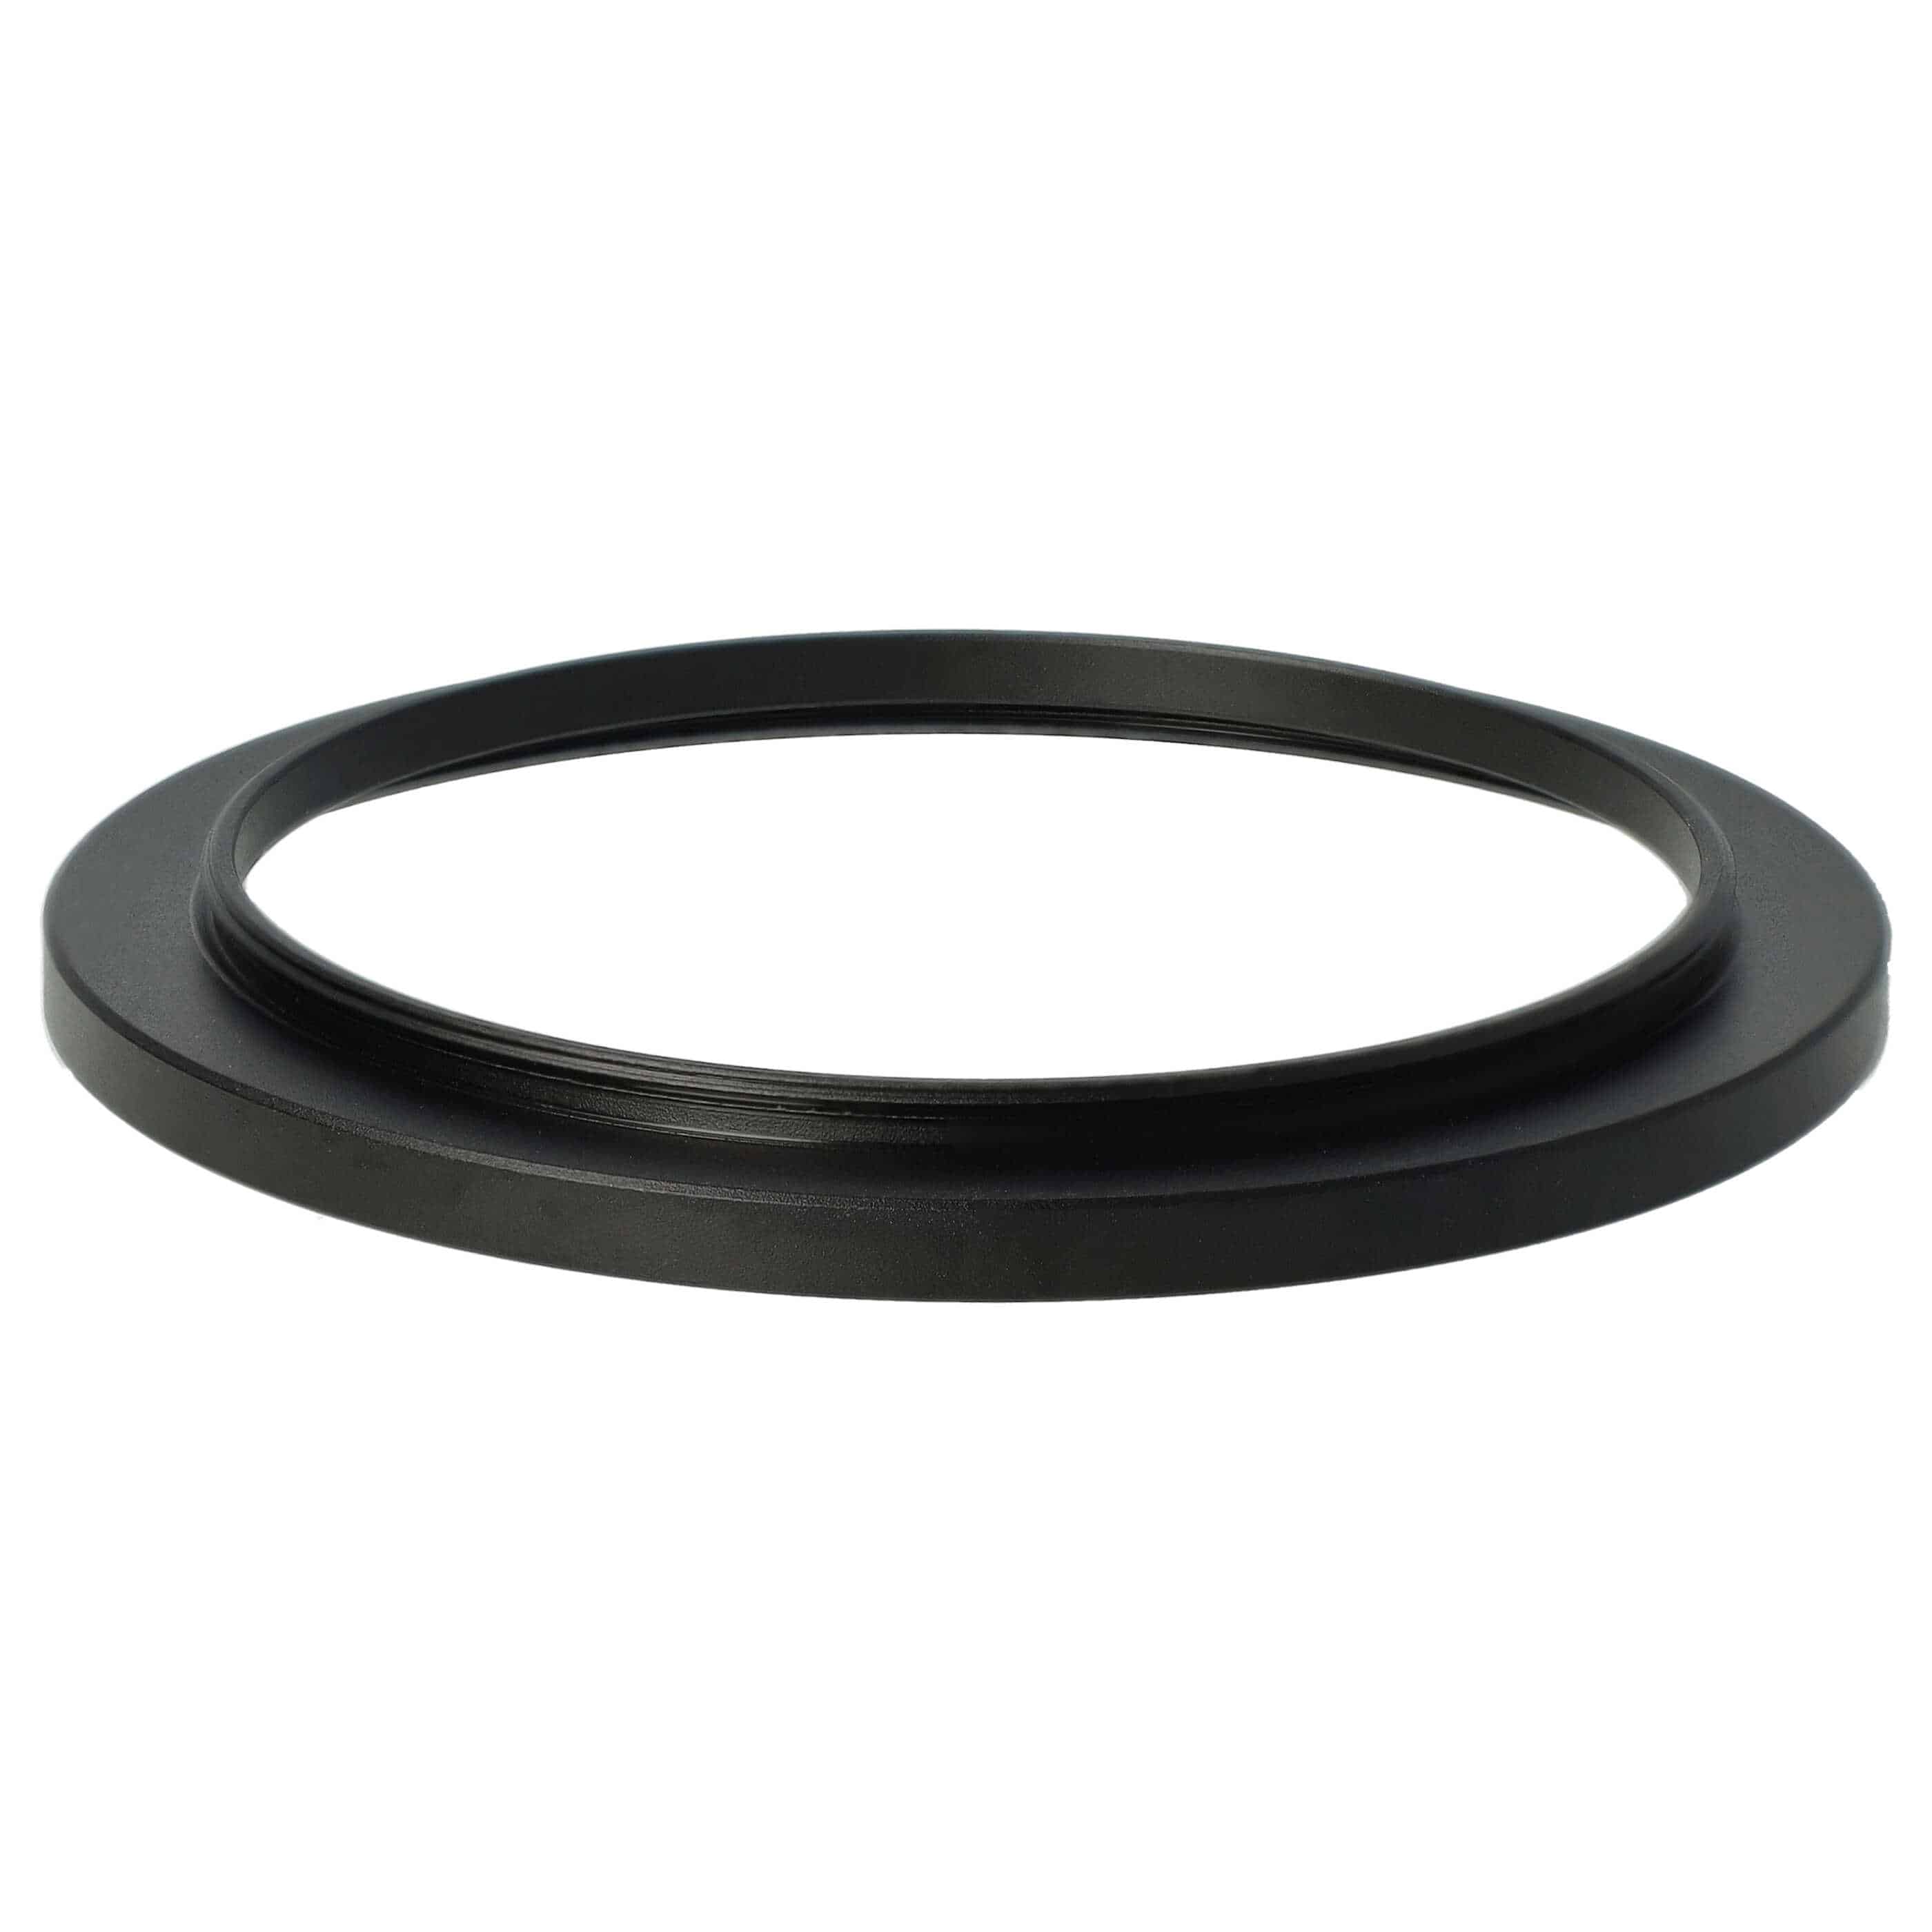 Step-Up Ring Adapter of 58 mm to 67 mmfor various Camera Lens - Filter Adapter